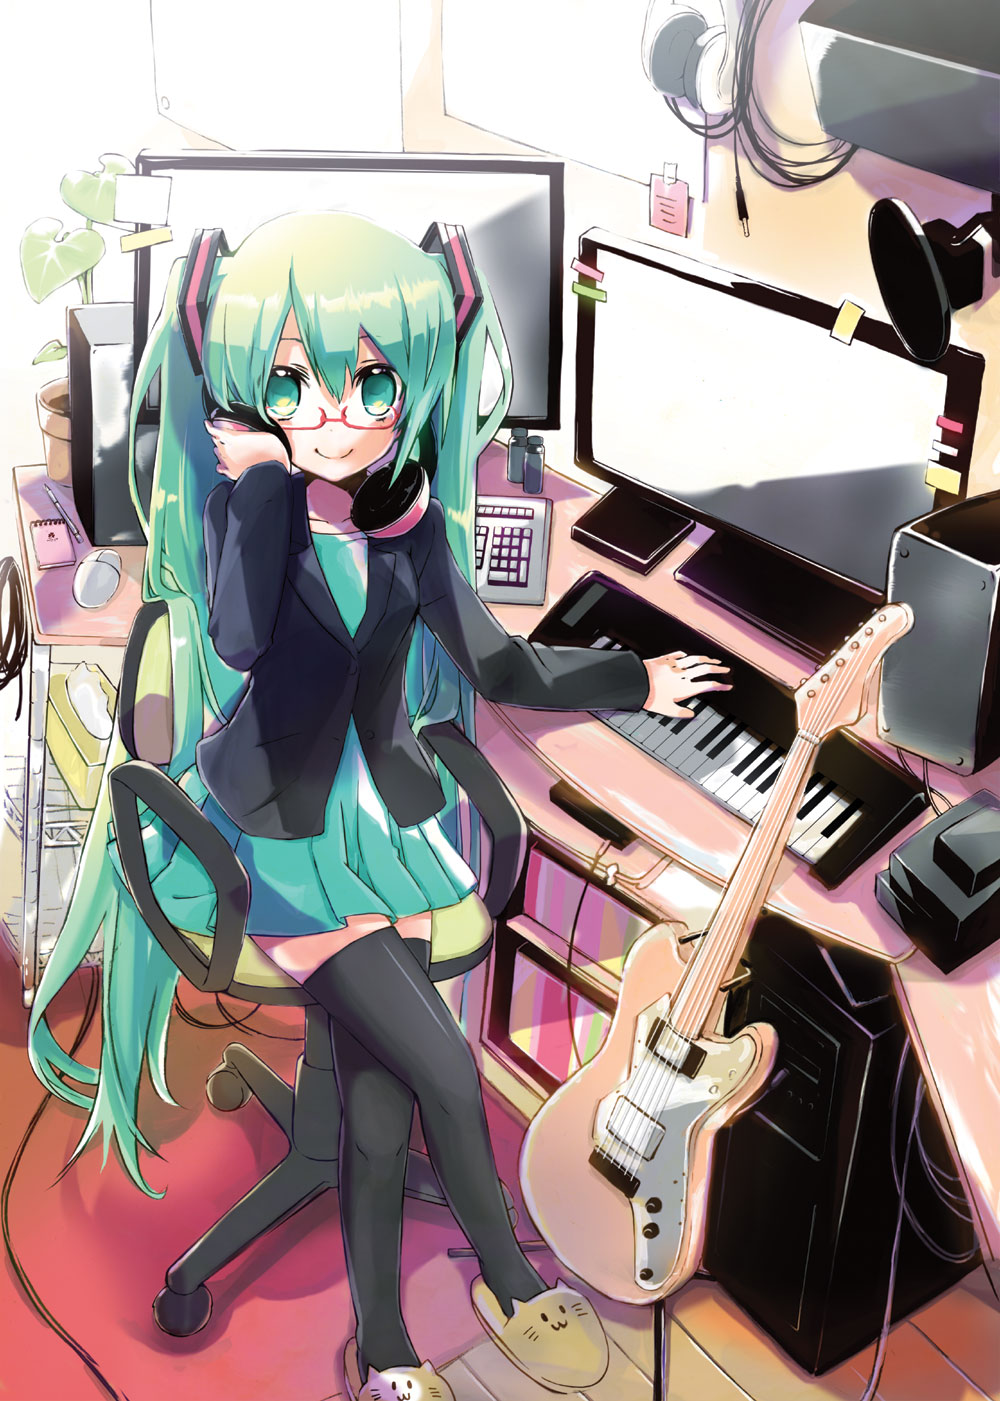 1girl bespectacled cat_slippers chair computer_keyboard crossed_legs dress electric_guitar glasses green_eyes green_hair guitar hatsune_miku headphones headphones_around_neck hekicha highres instrument keyboard_(instrument) long_hair looking_at_viewer monitor sitting smile solo thigh-highs tissue_box twintails very_long_hair vocaloid